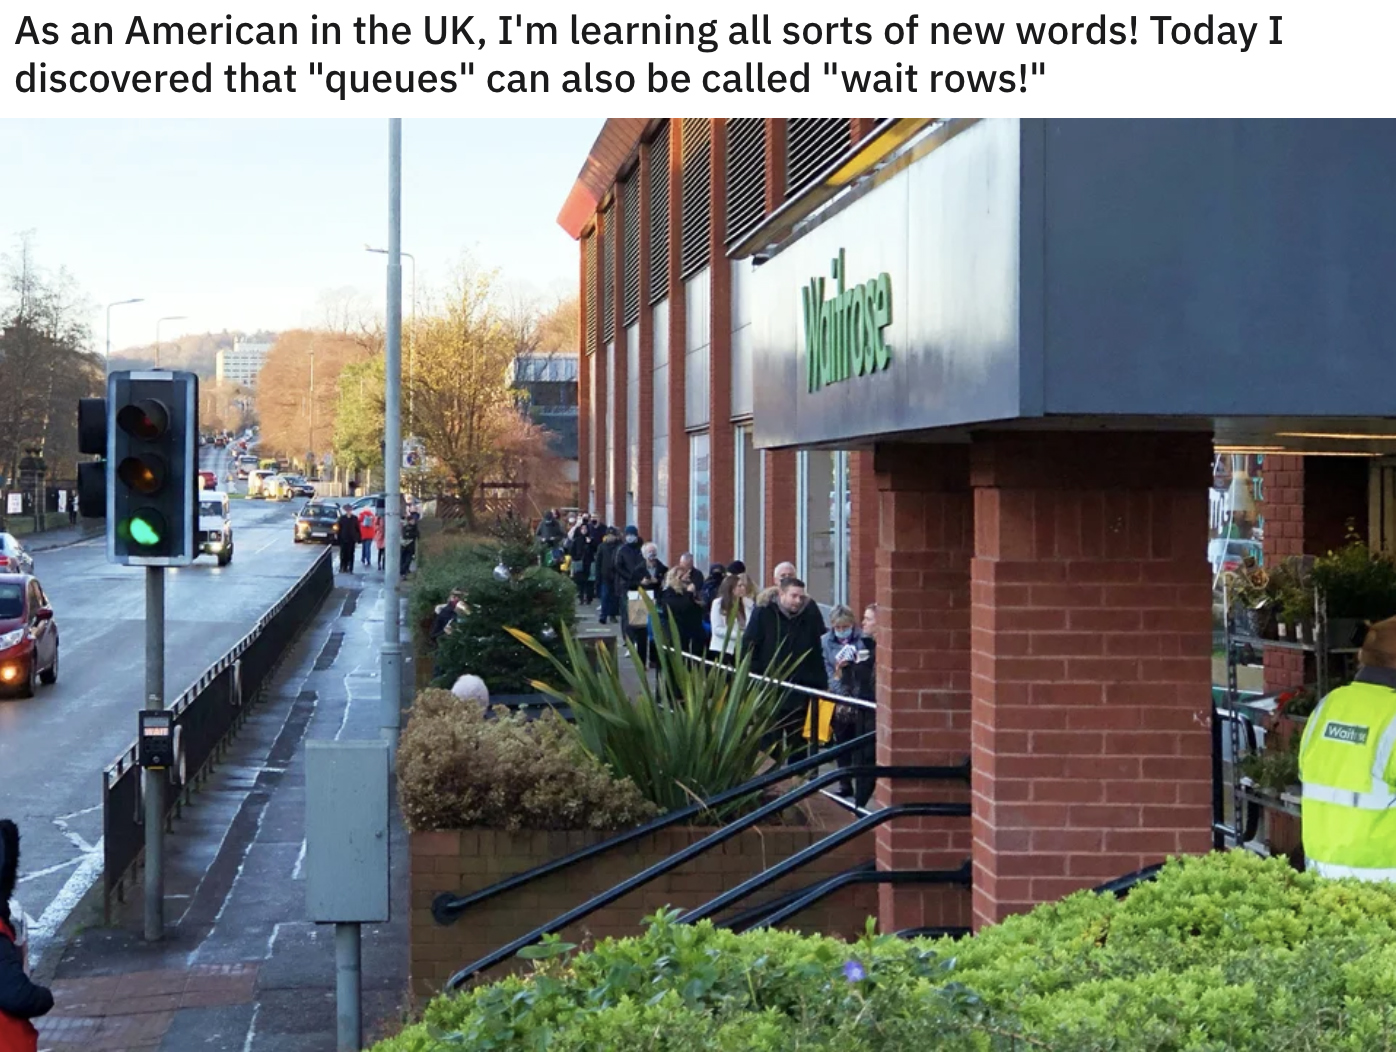 As an American in the UK, I'm learning all sorts of new words! Today I discovered that "queues" can also be called "wait rows!"